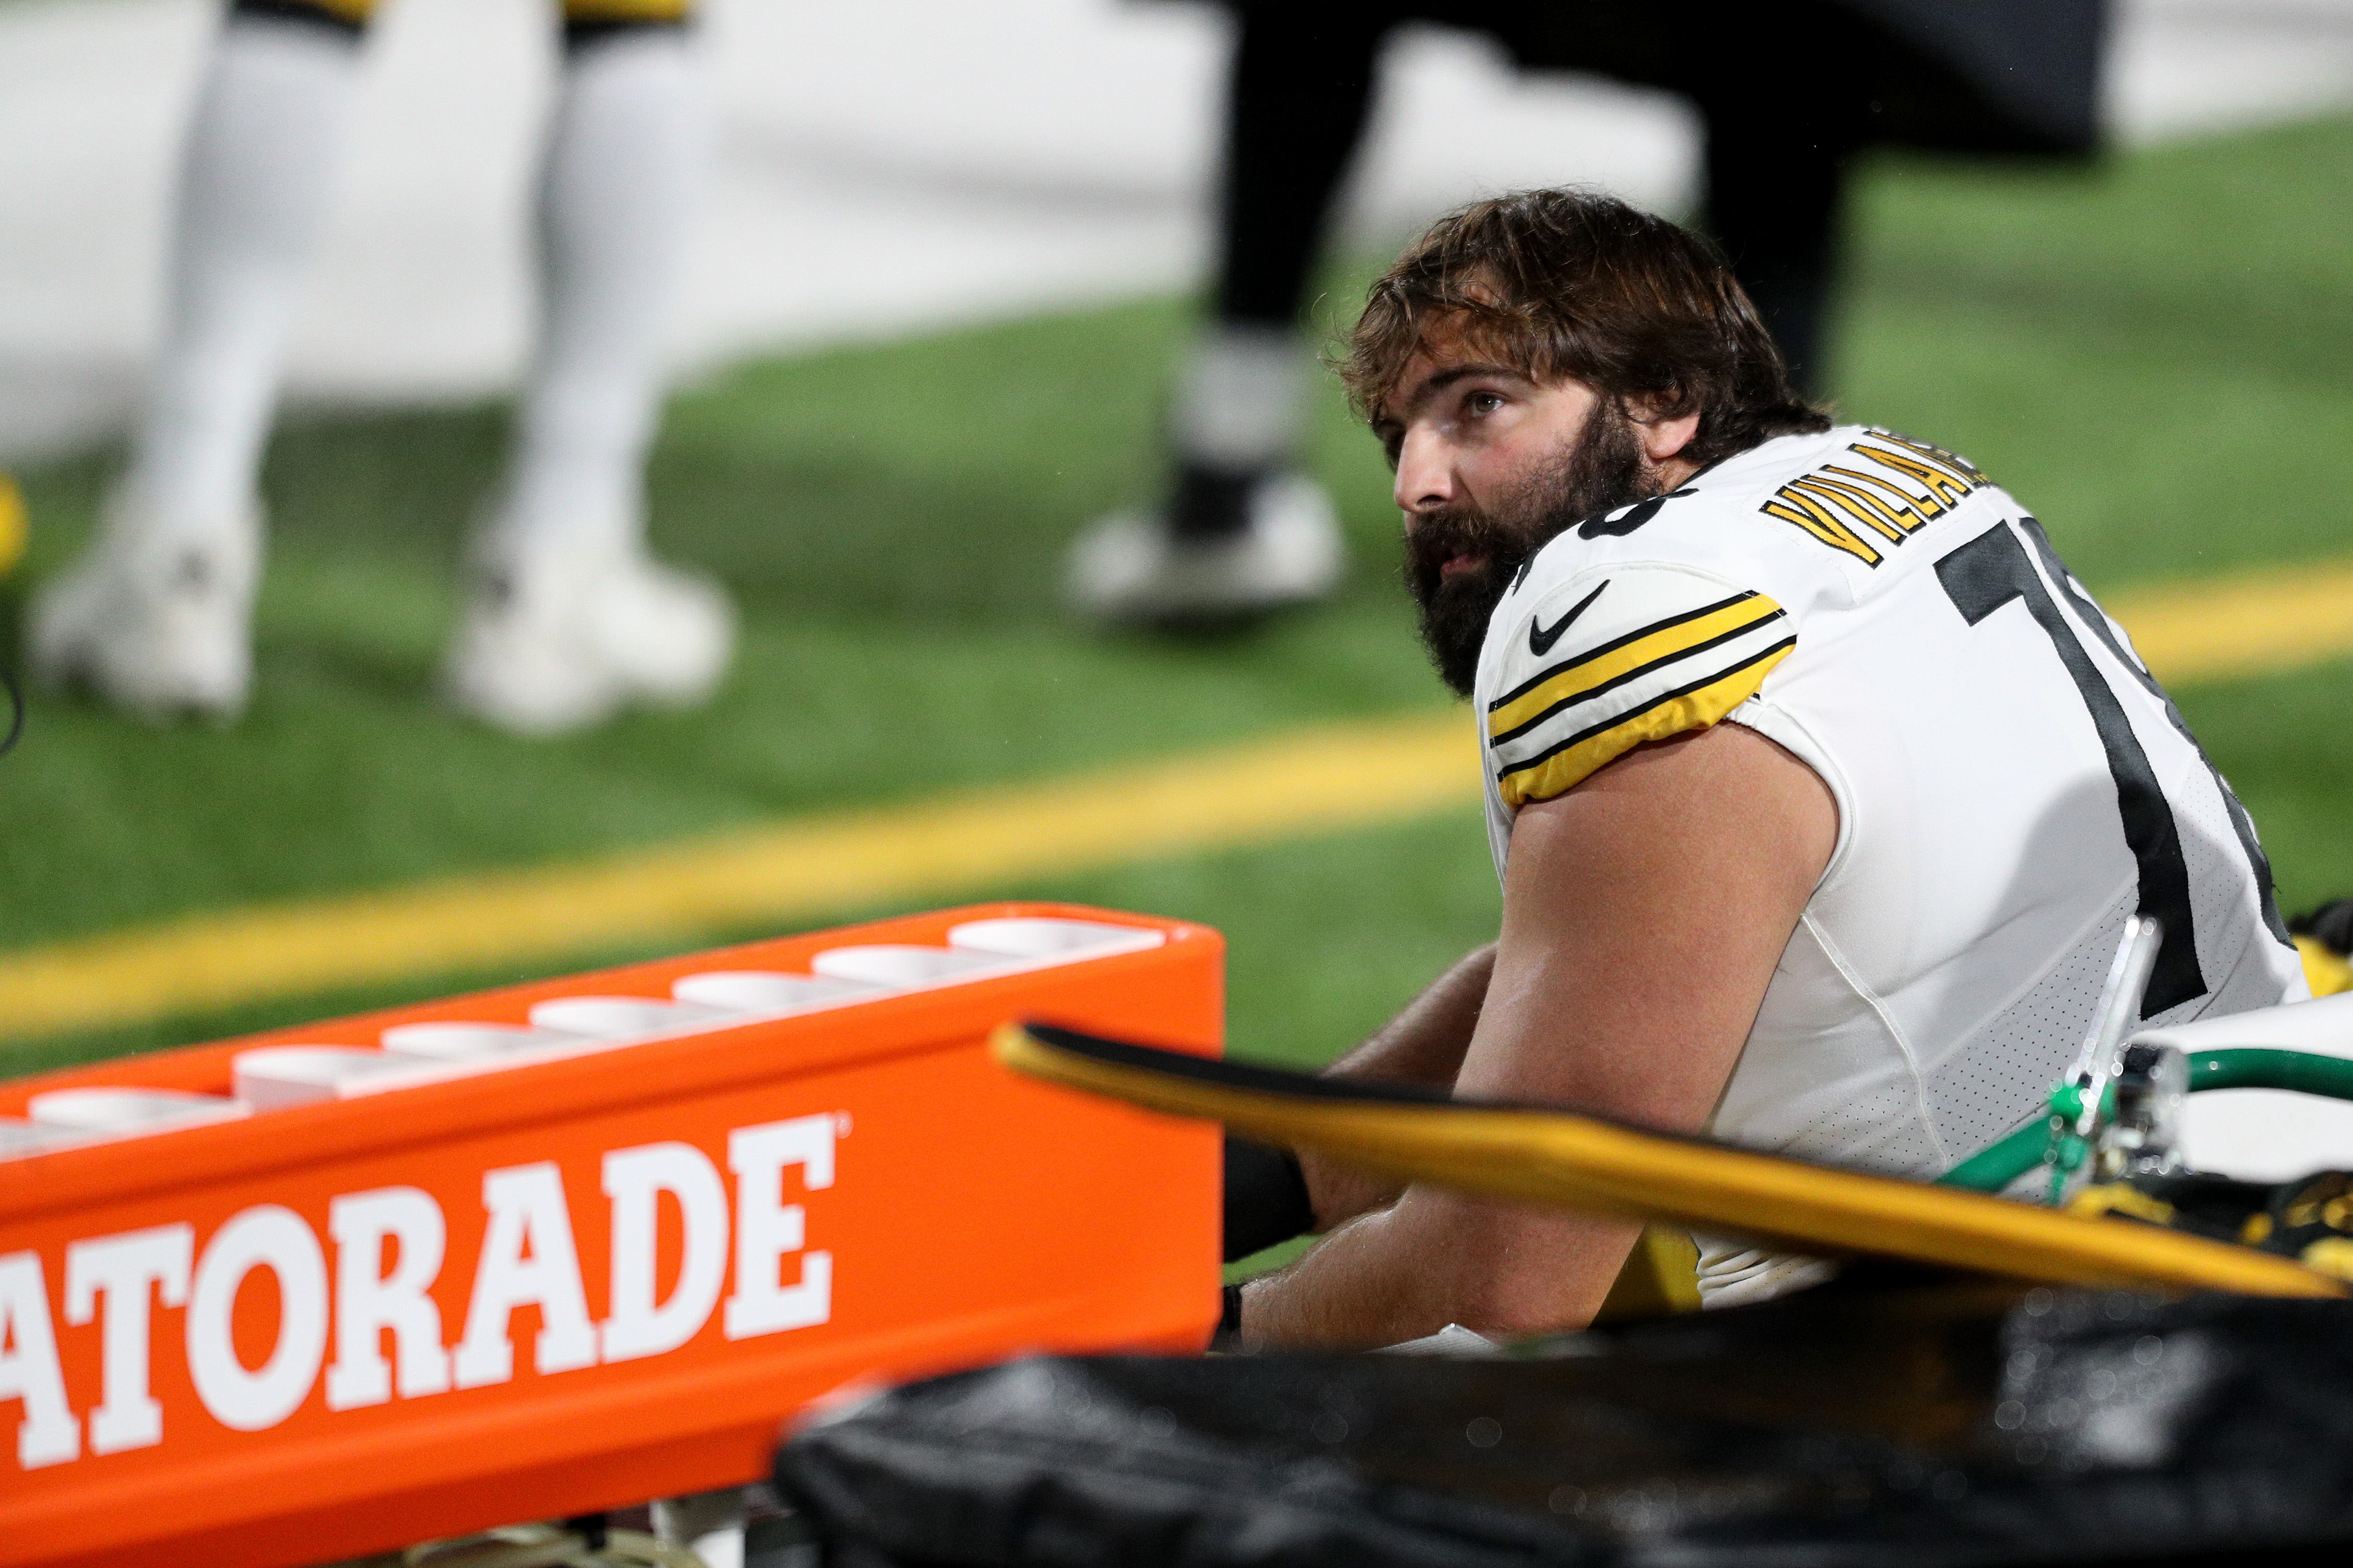 Alejandro Villanueva of the Pittsburgh Steelers looks on during a game against the Buffalo Bills at Bills Stadium on December 13, 2020 in Orchard Park, New York.